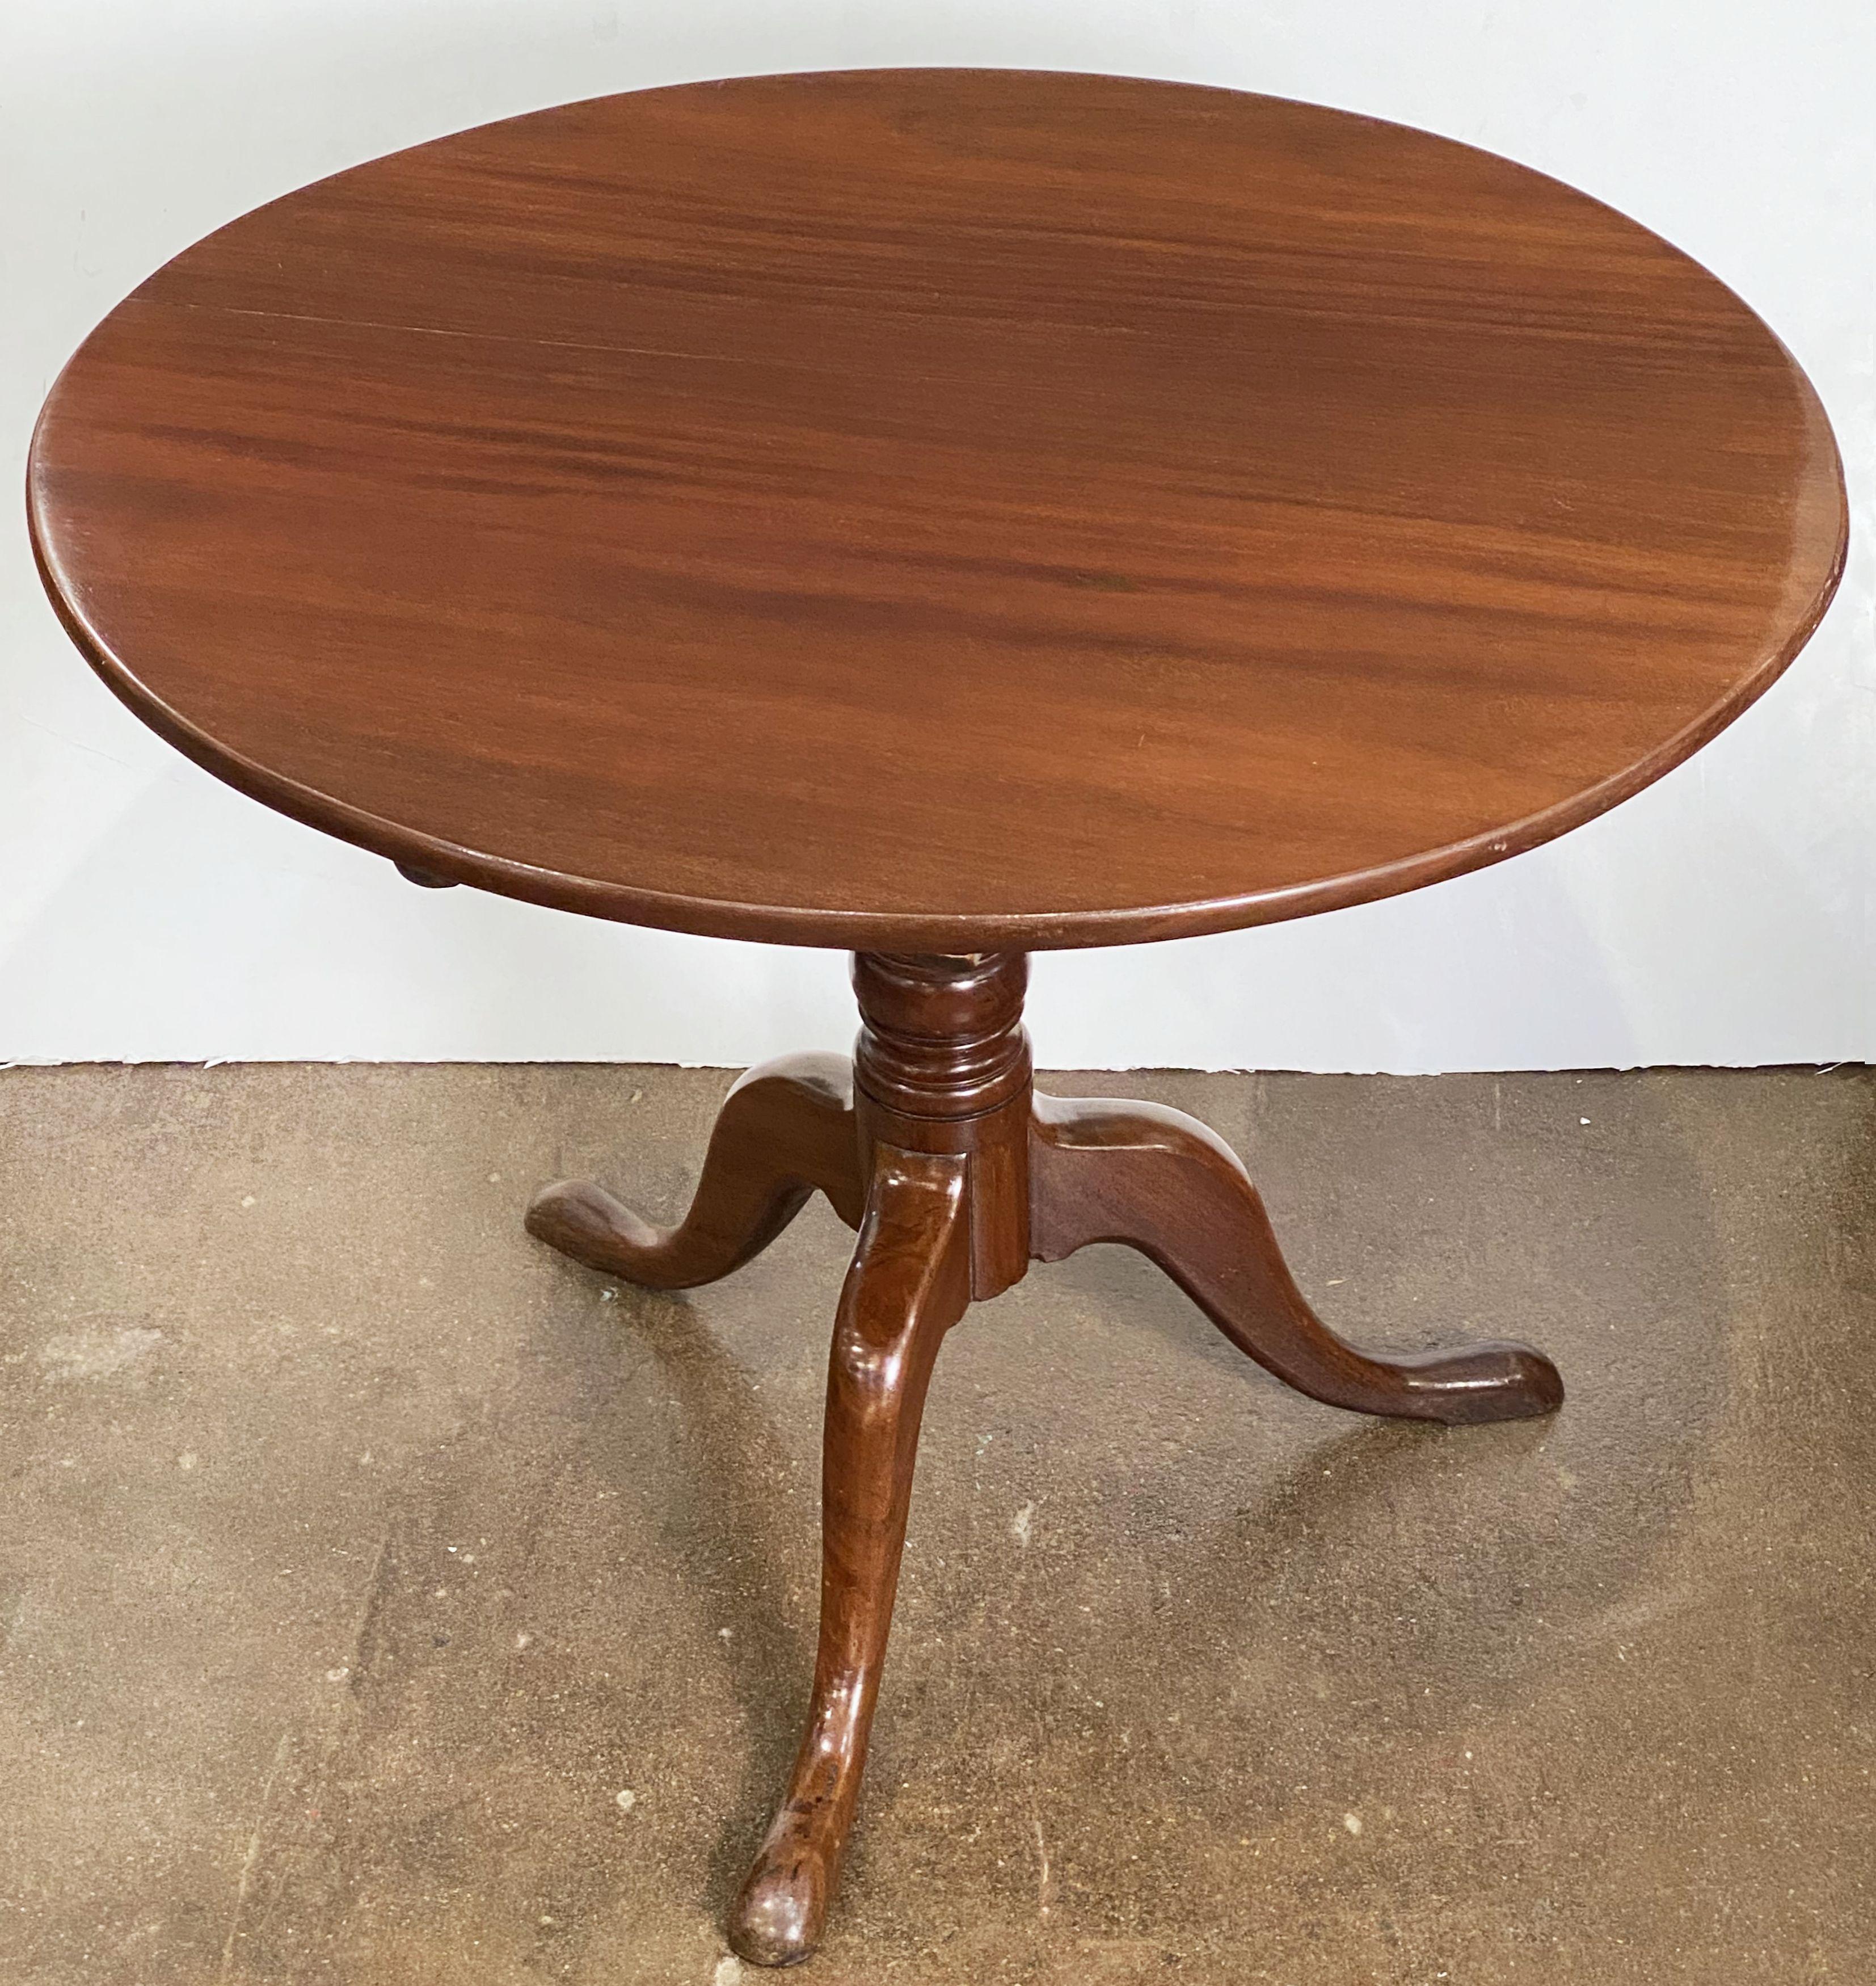 English Tilt-Top Tripod Table of Mahogany In Good Condition For Sale In Austin, TX